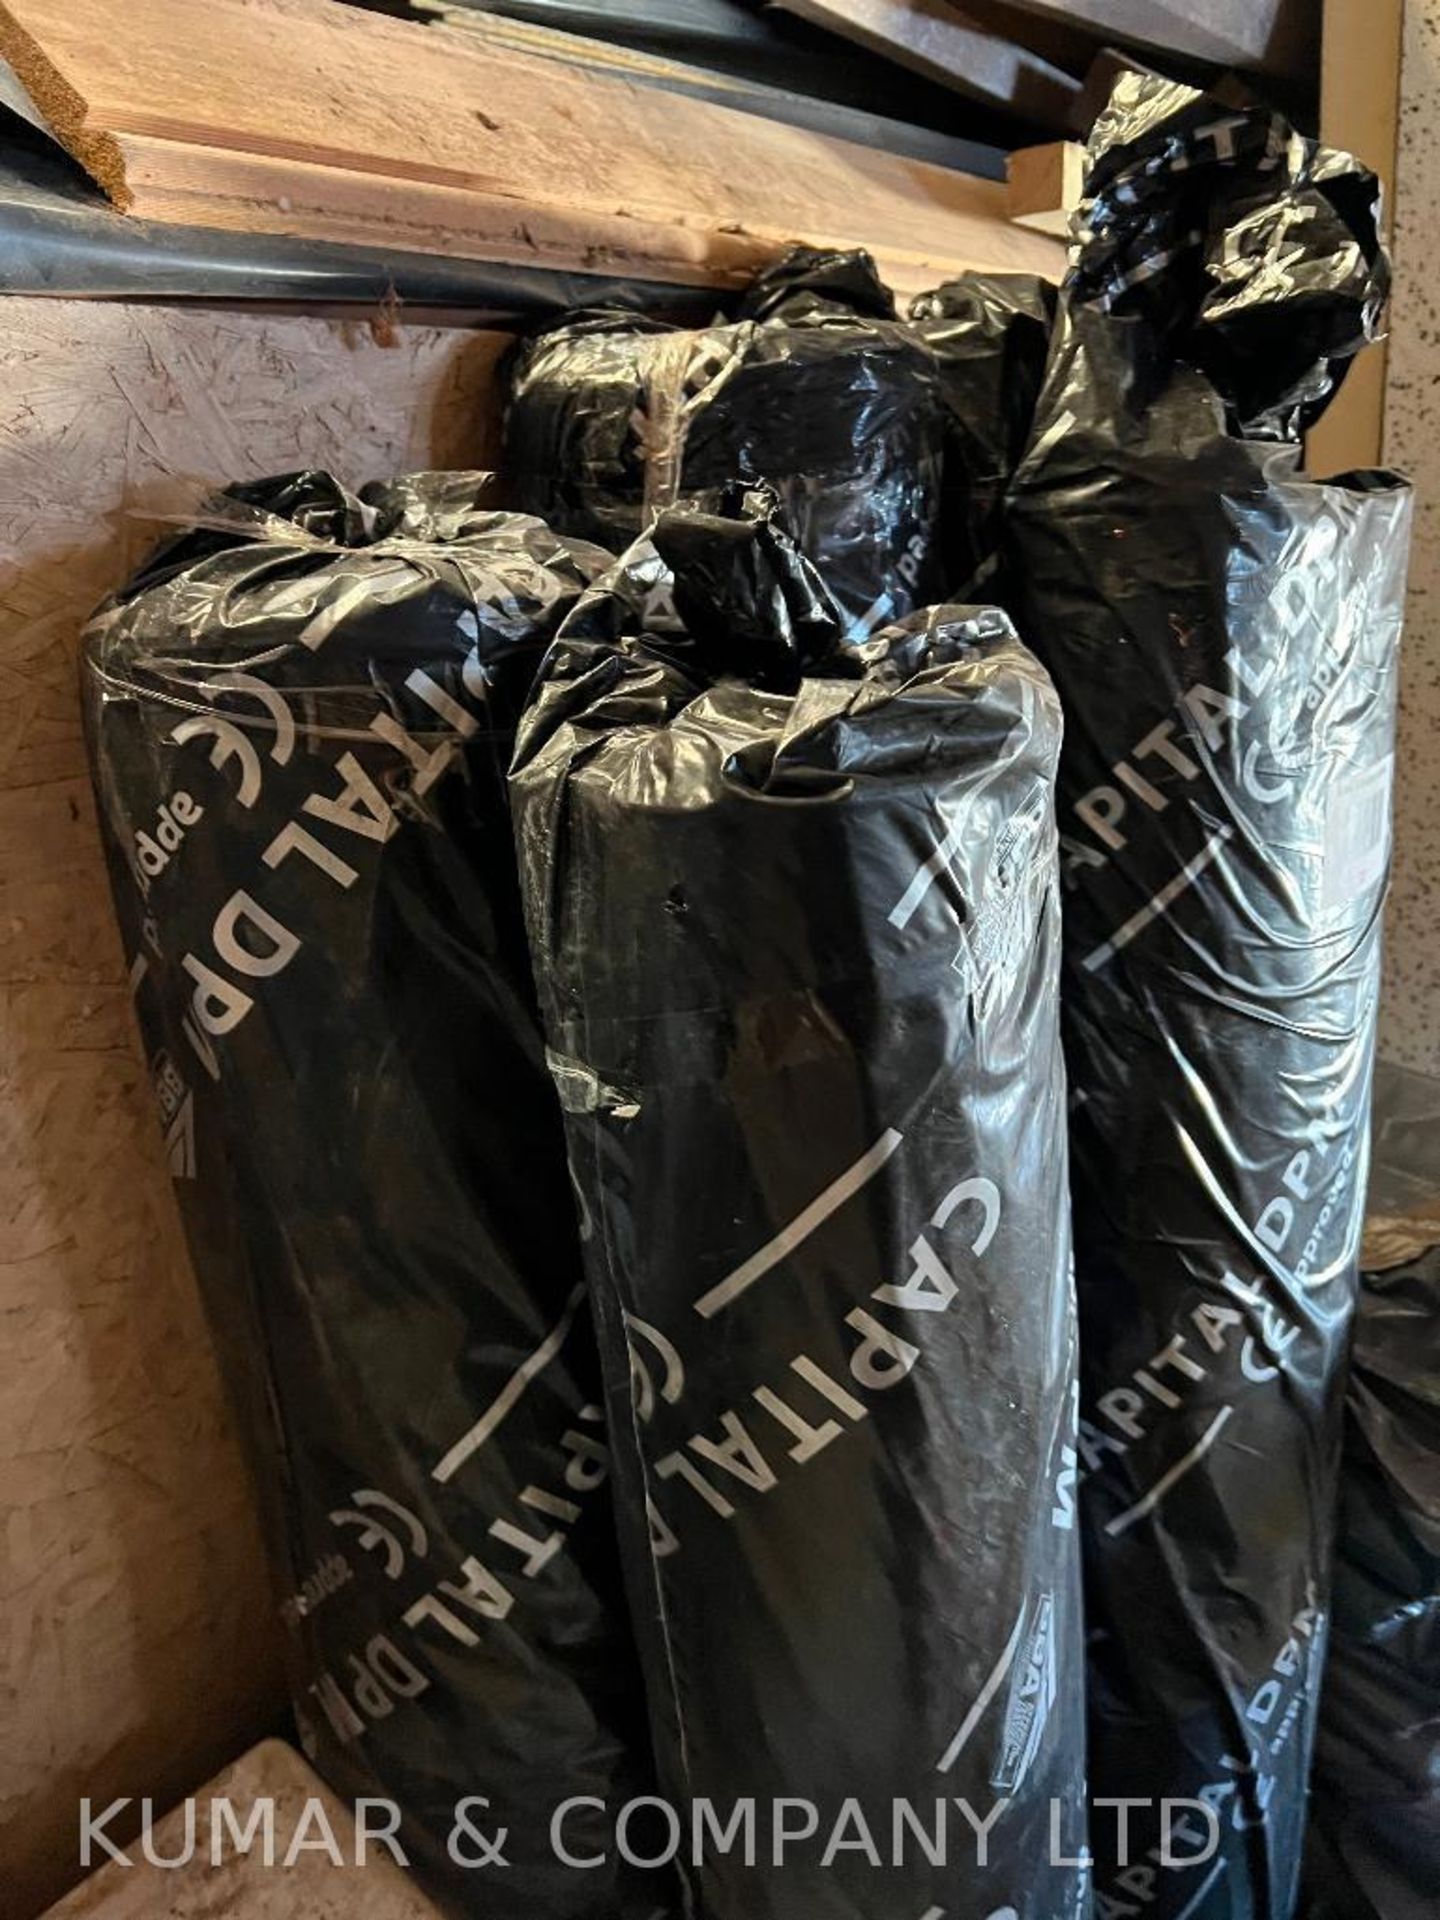 Approximately 10 Bags of New Rubble Sacks and 4 Rolls of Capital DPM Damp Proof Membrane in Black PL - Image 6 of 7